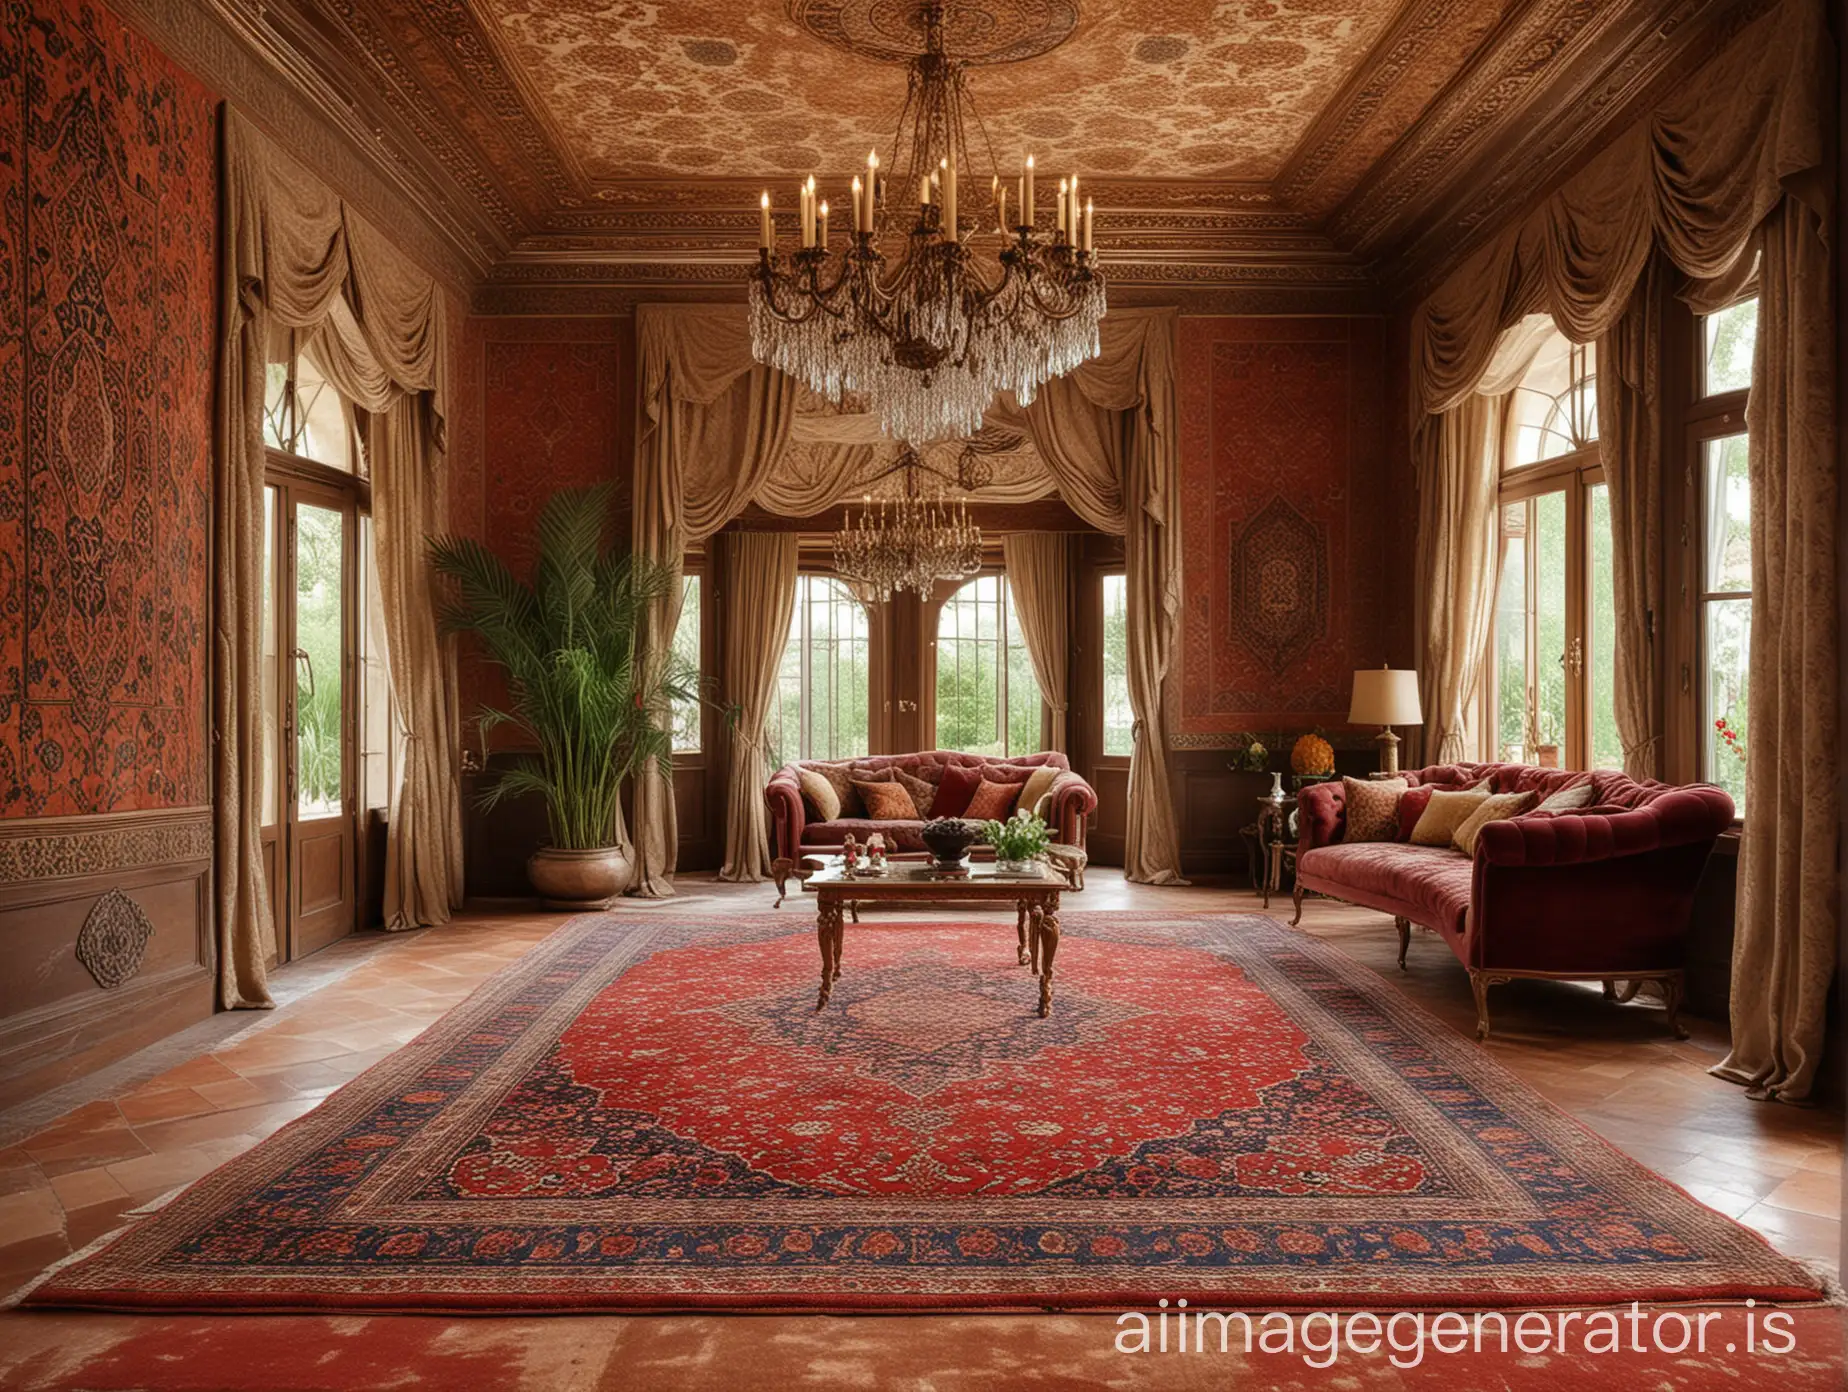 Luxury house with Persian Carpet